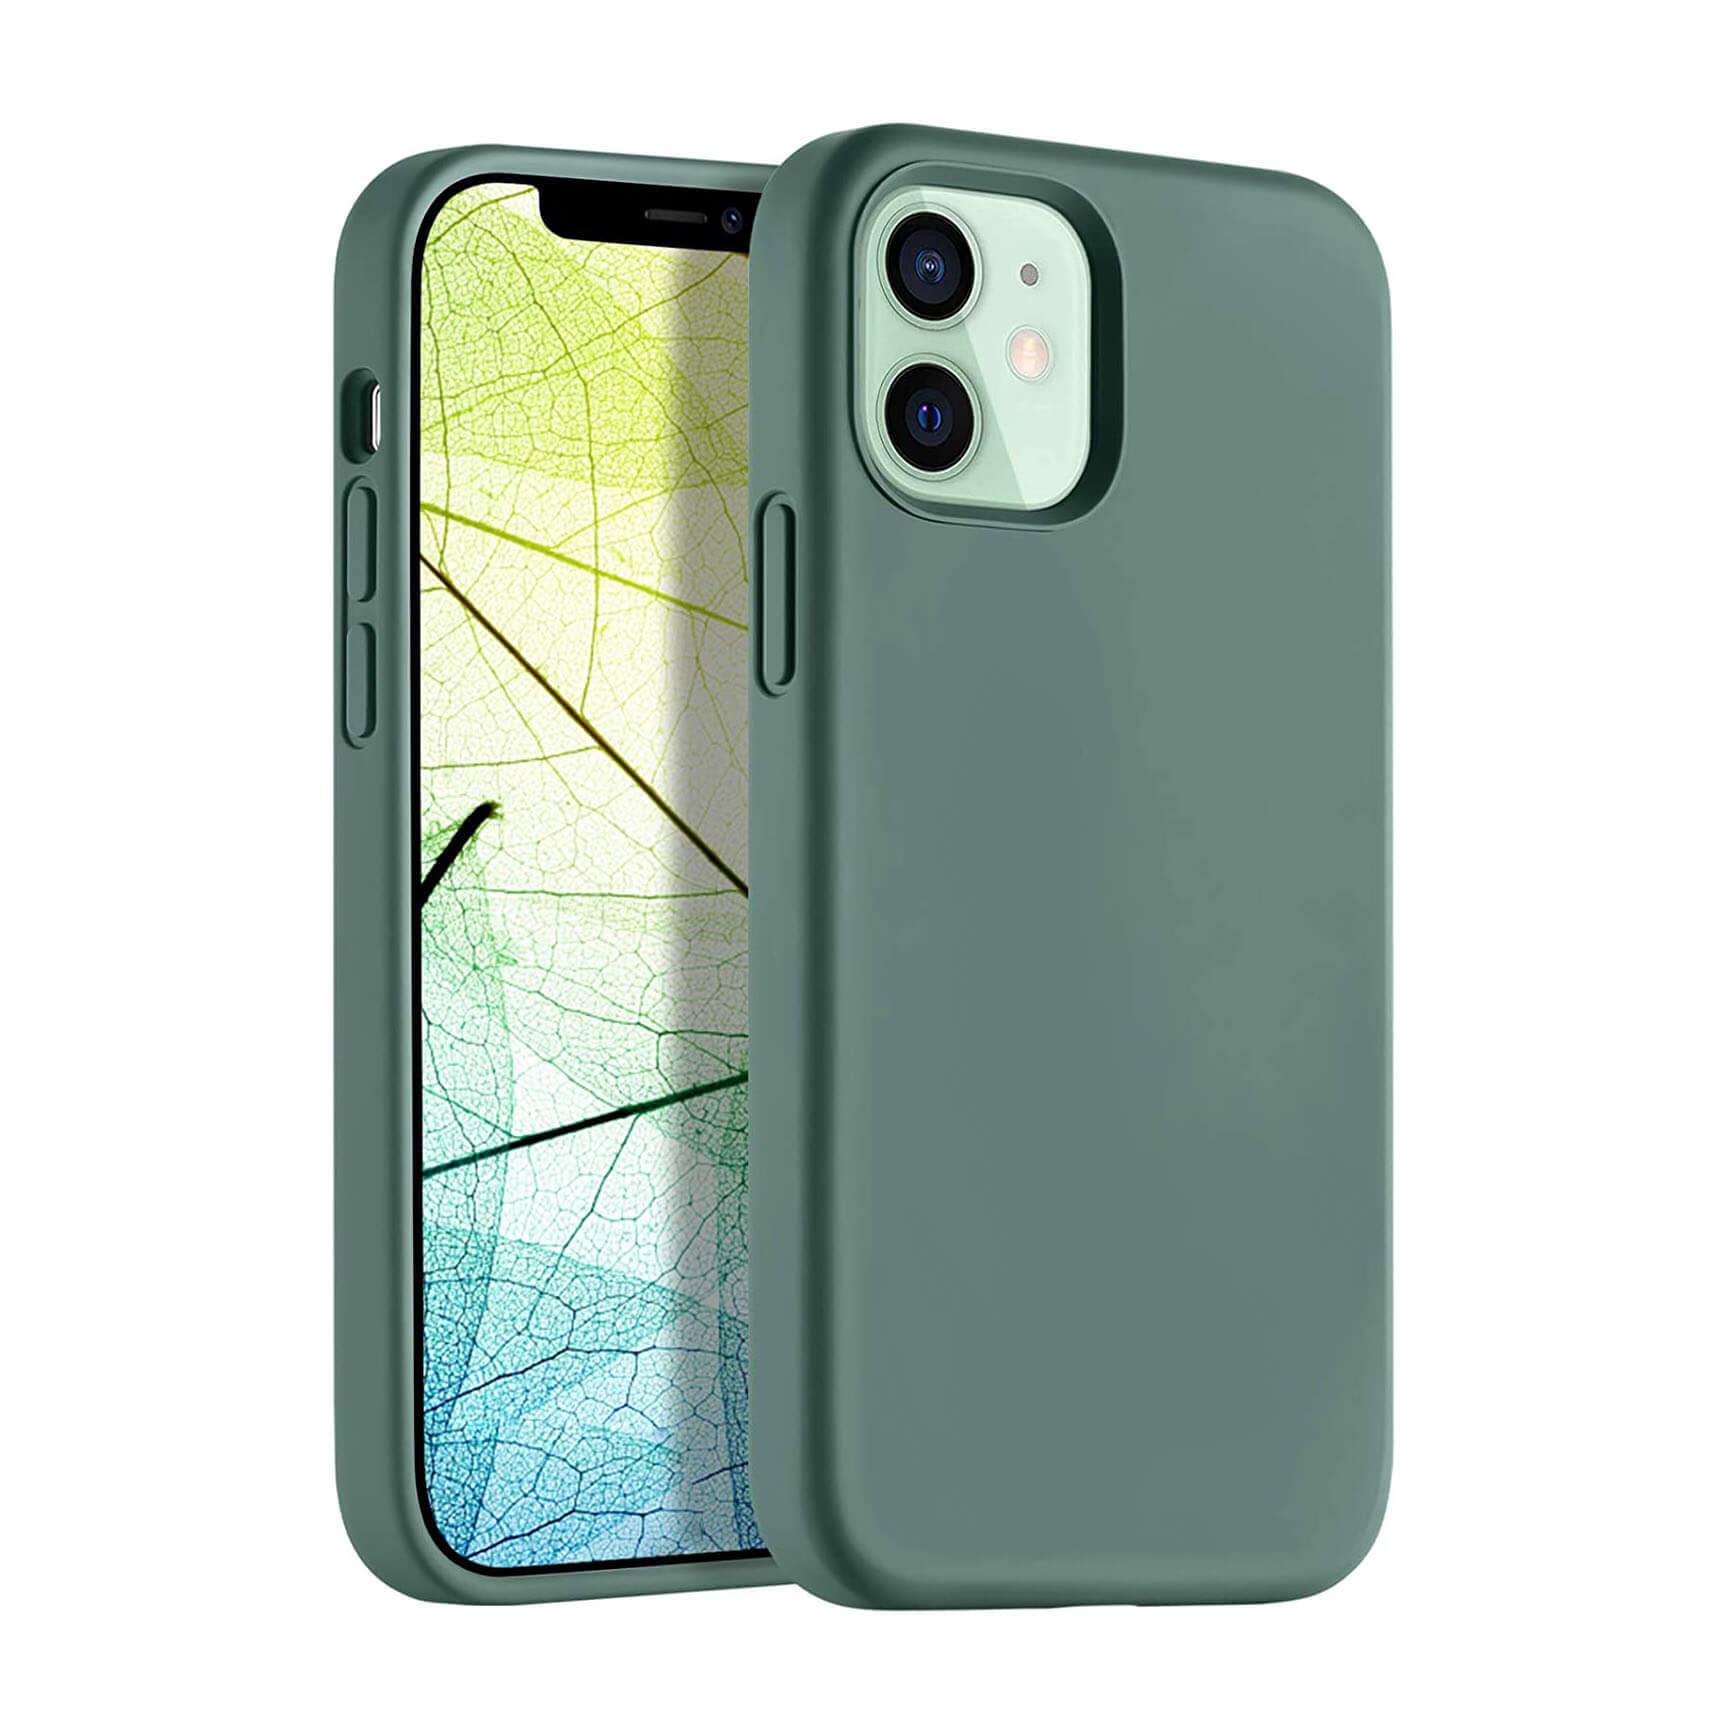 Liquid Silicone Case For Apple iPhone 12 Mini Luxury Thin Phone Cover Green